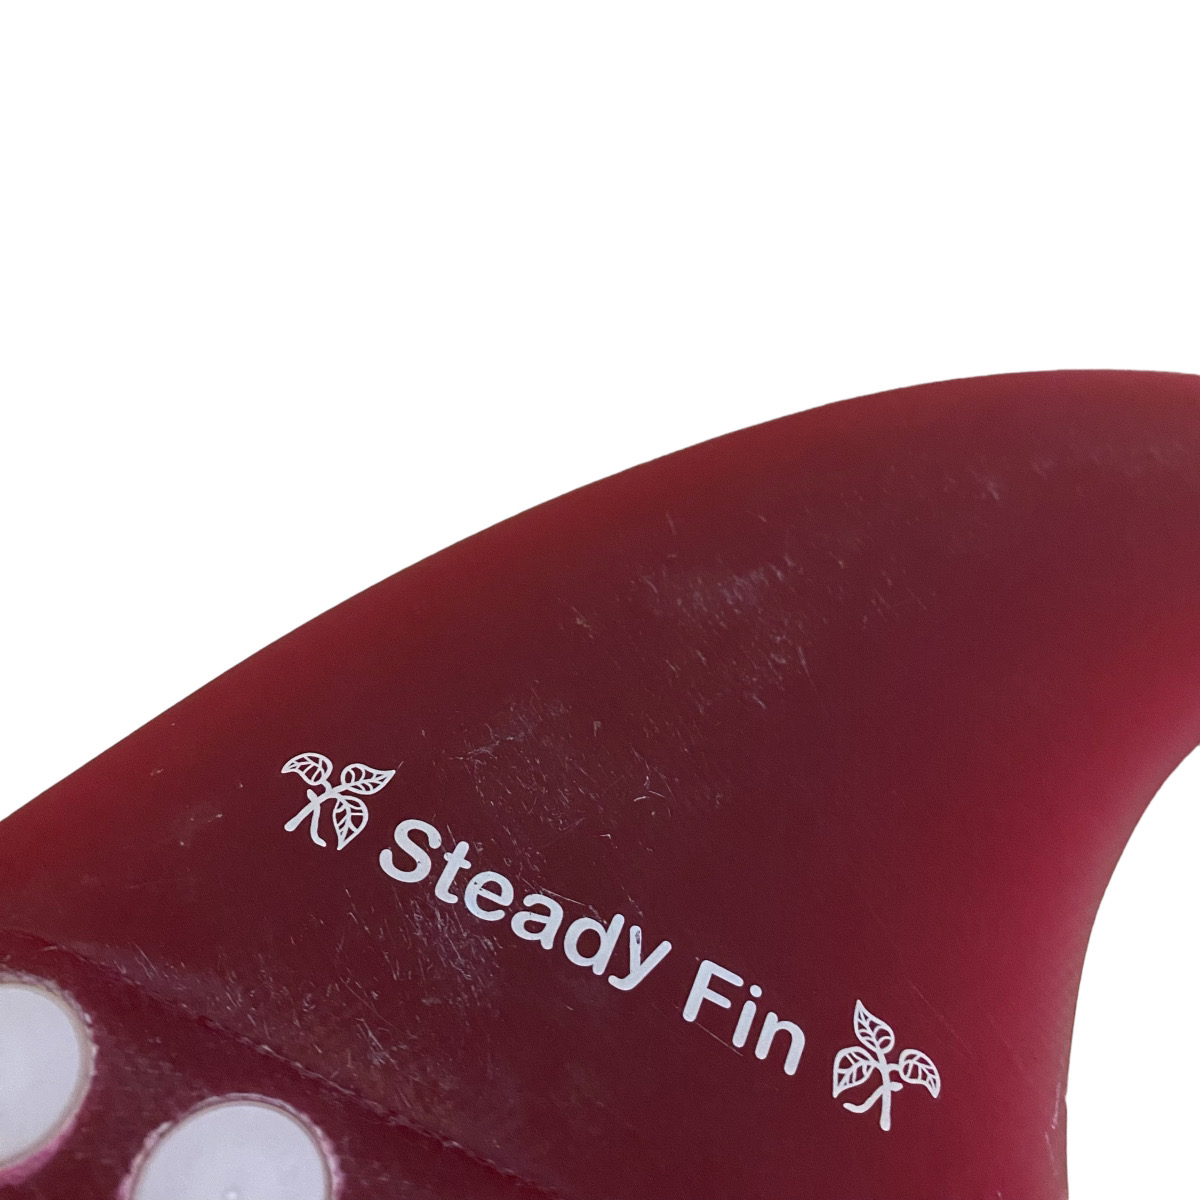 Steady Fin / STANDARD 7.0 / 中古フィン / USED FIN